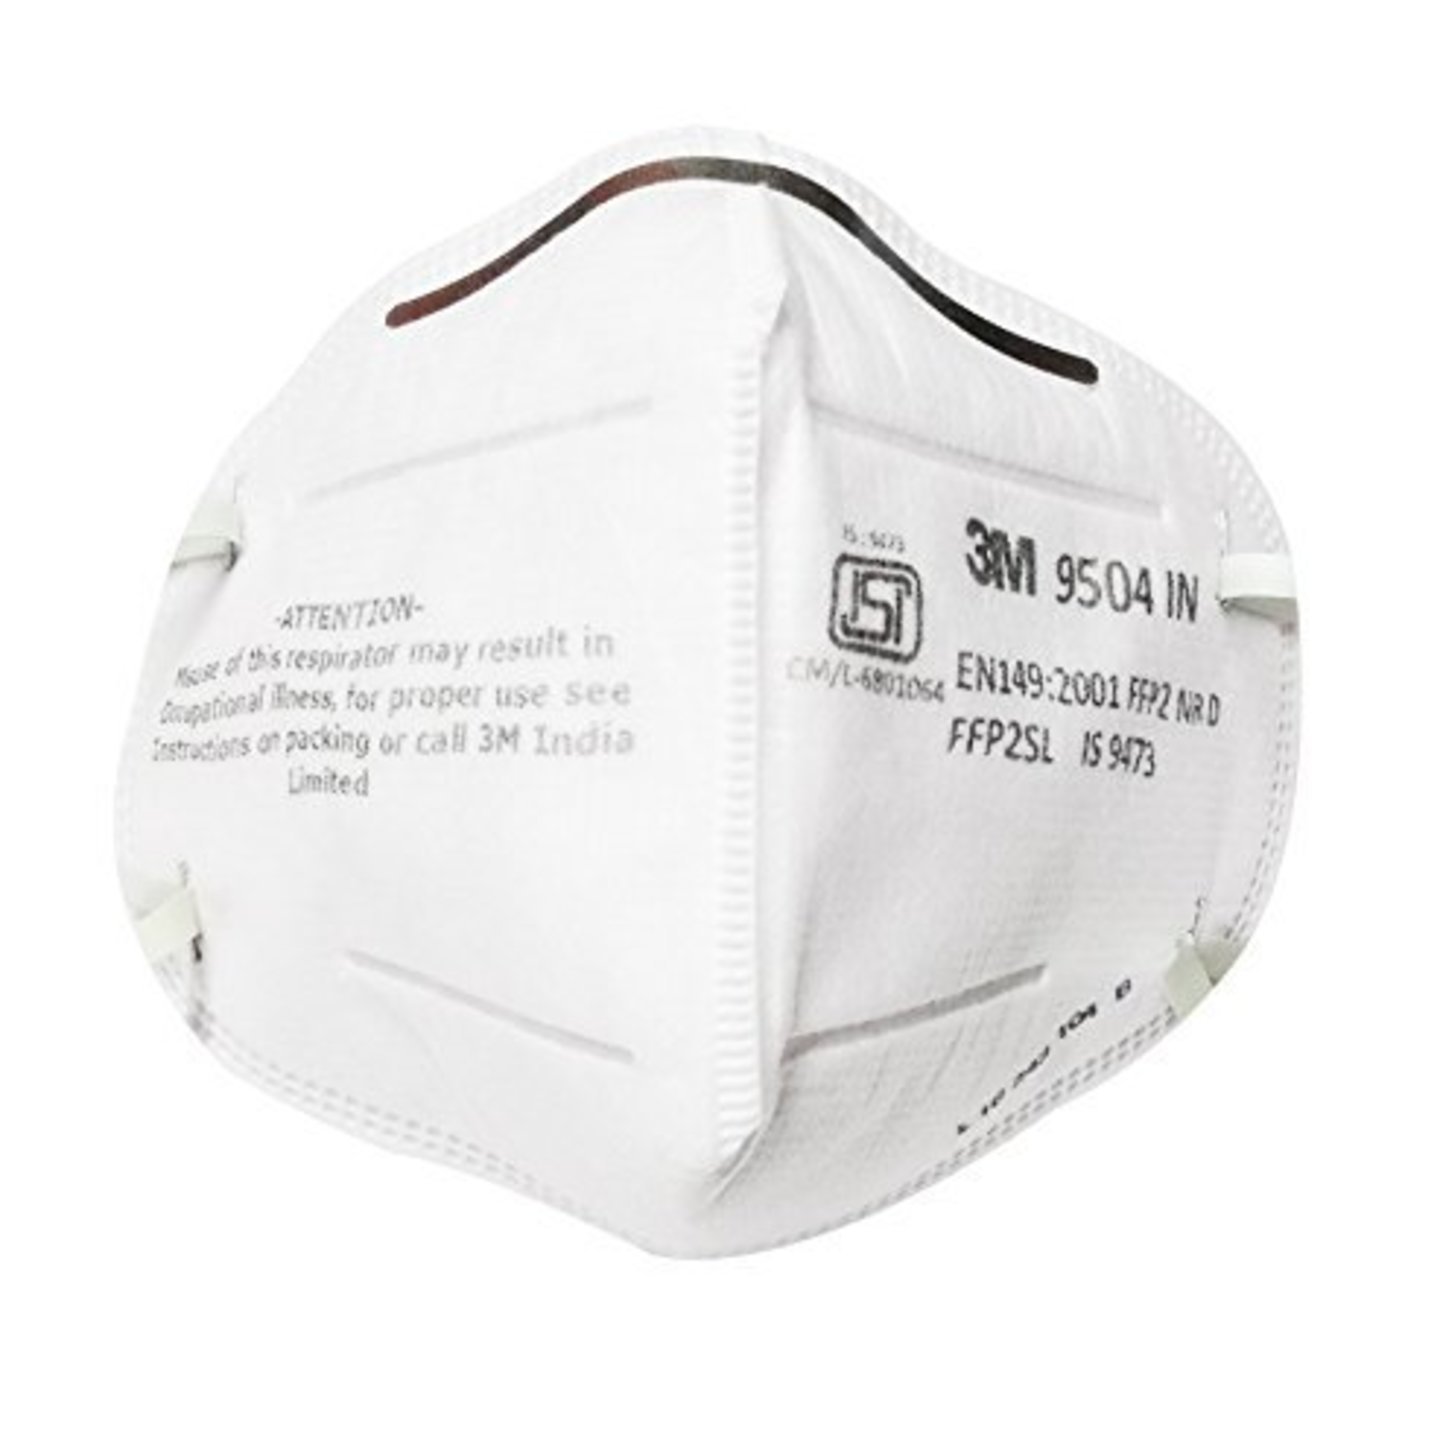 3M 9504 IN Particulare Respirator Mask White